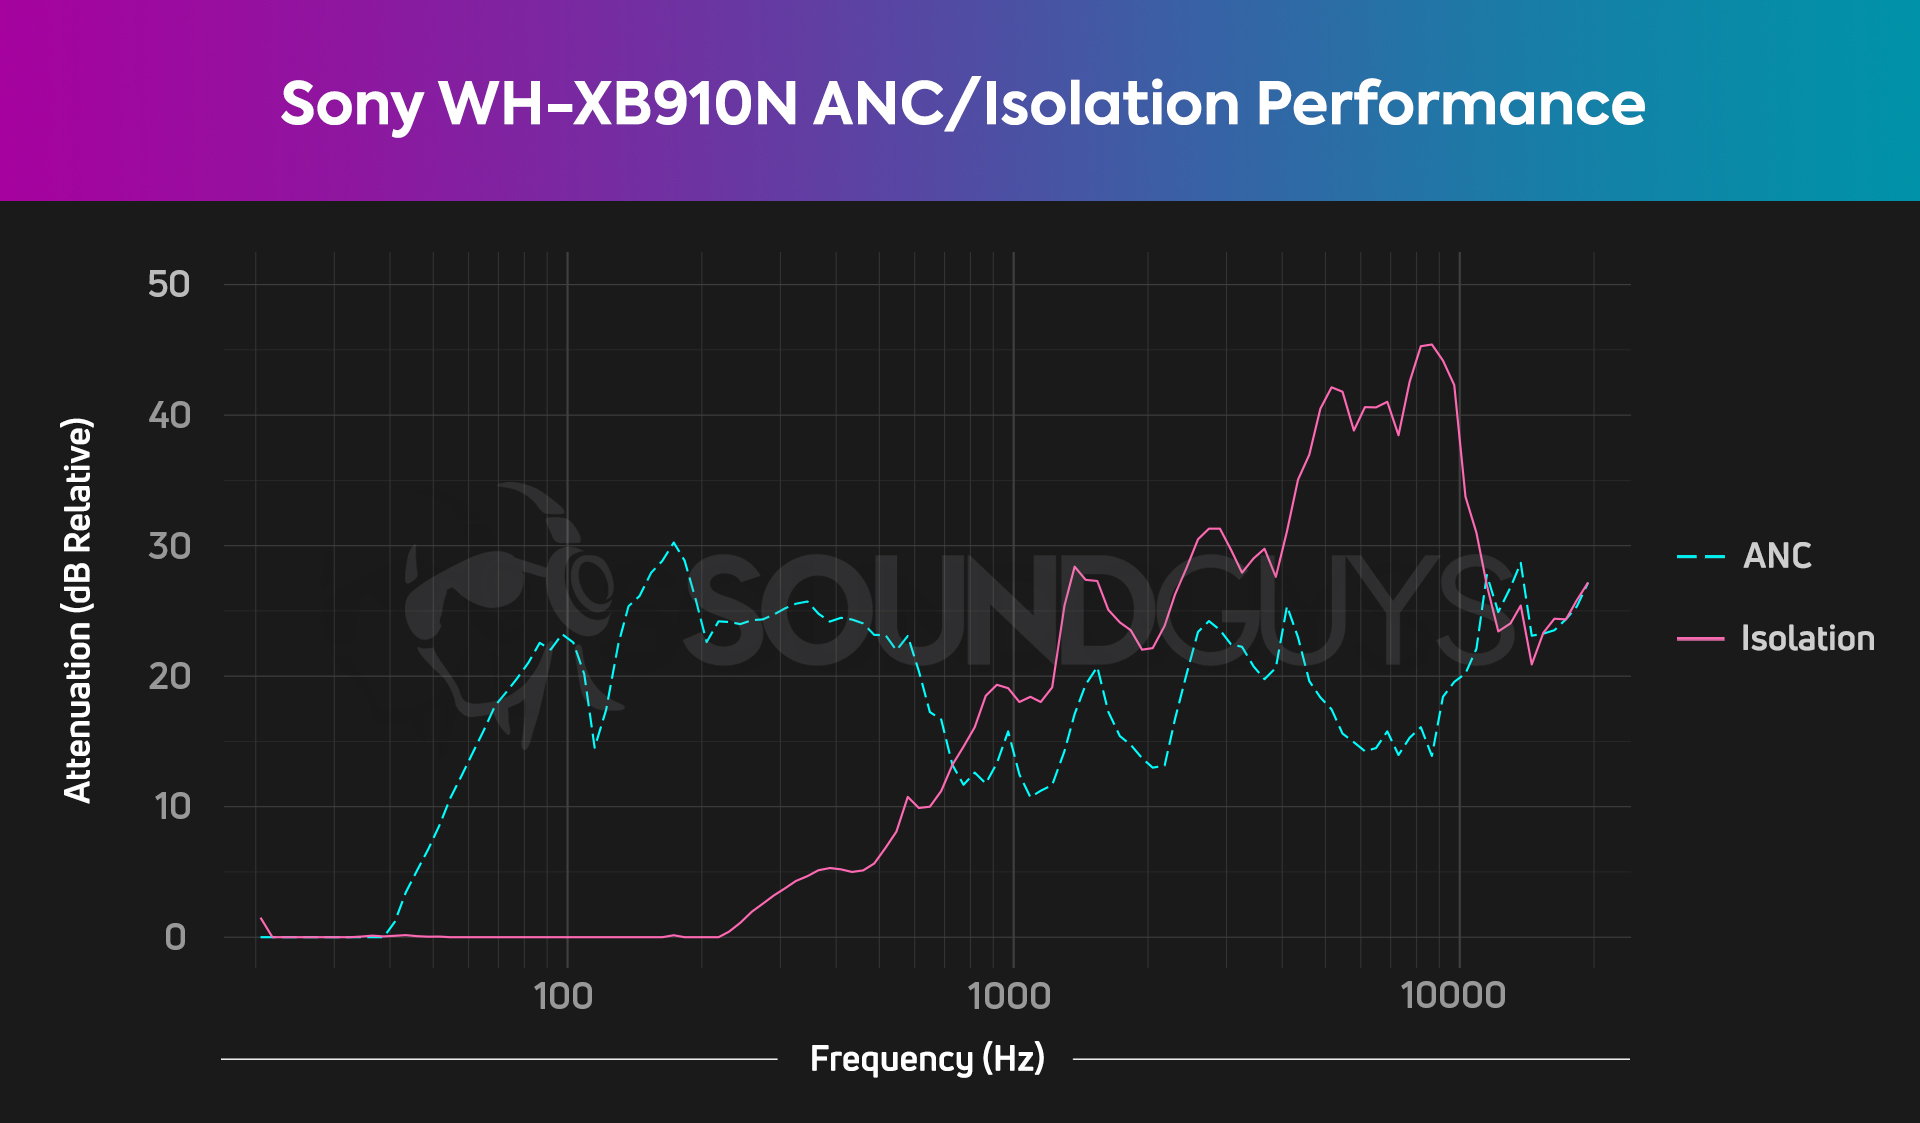 The isolation and ANC performance of the Sony WH-XB910N as shown in a chart.